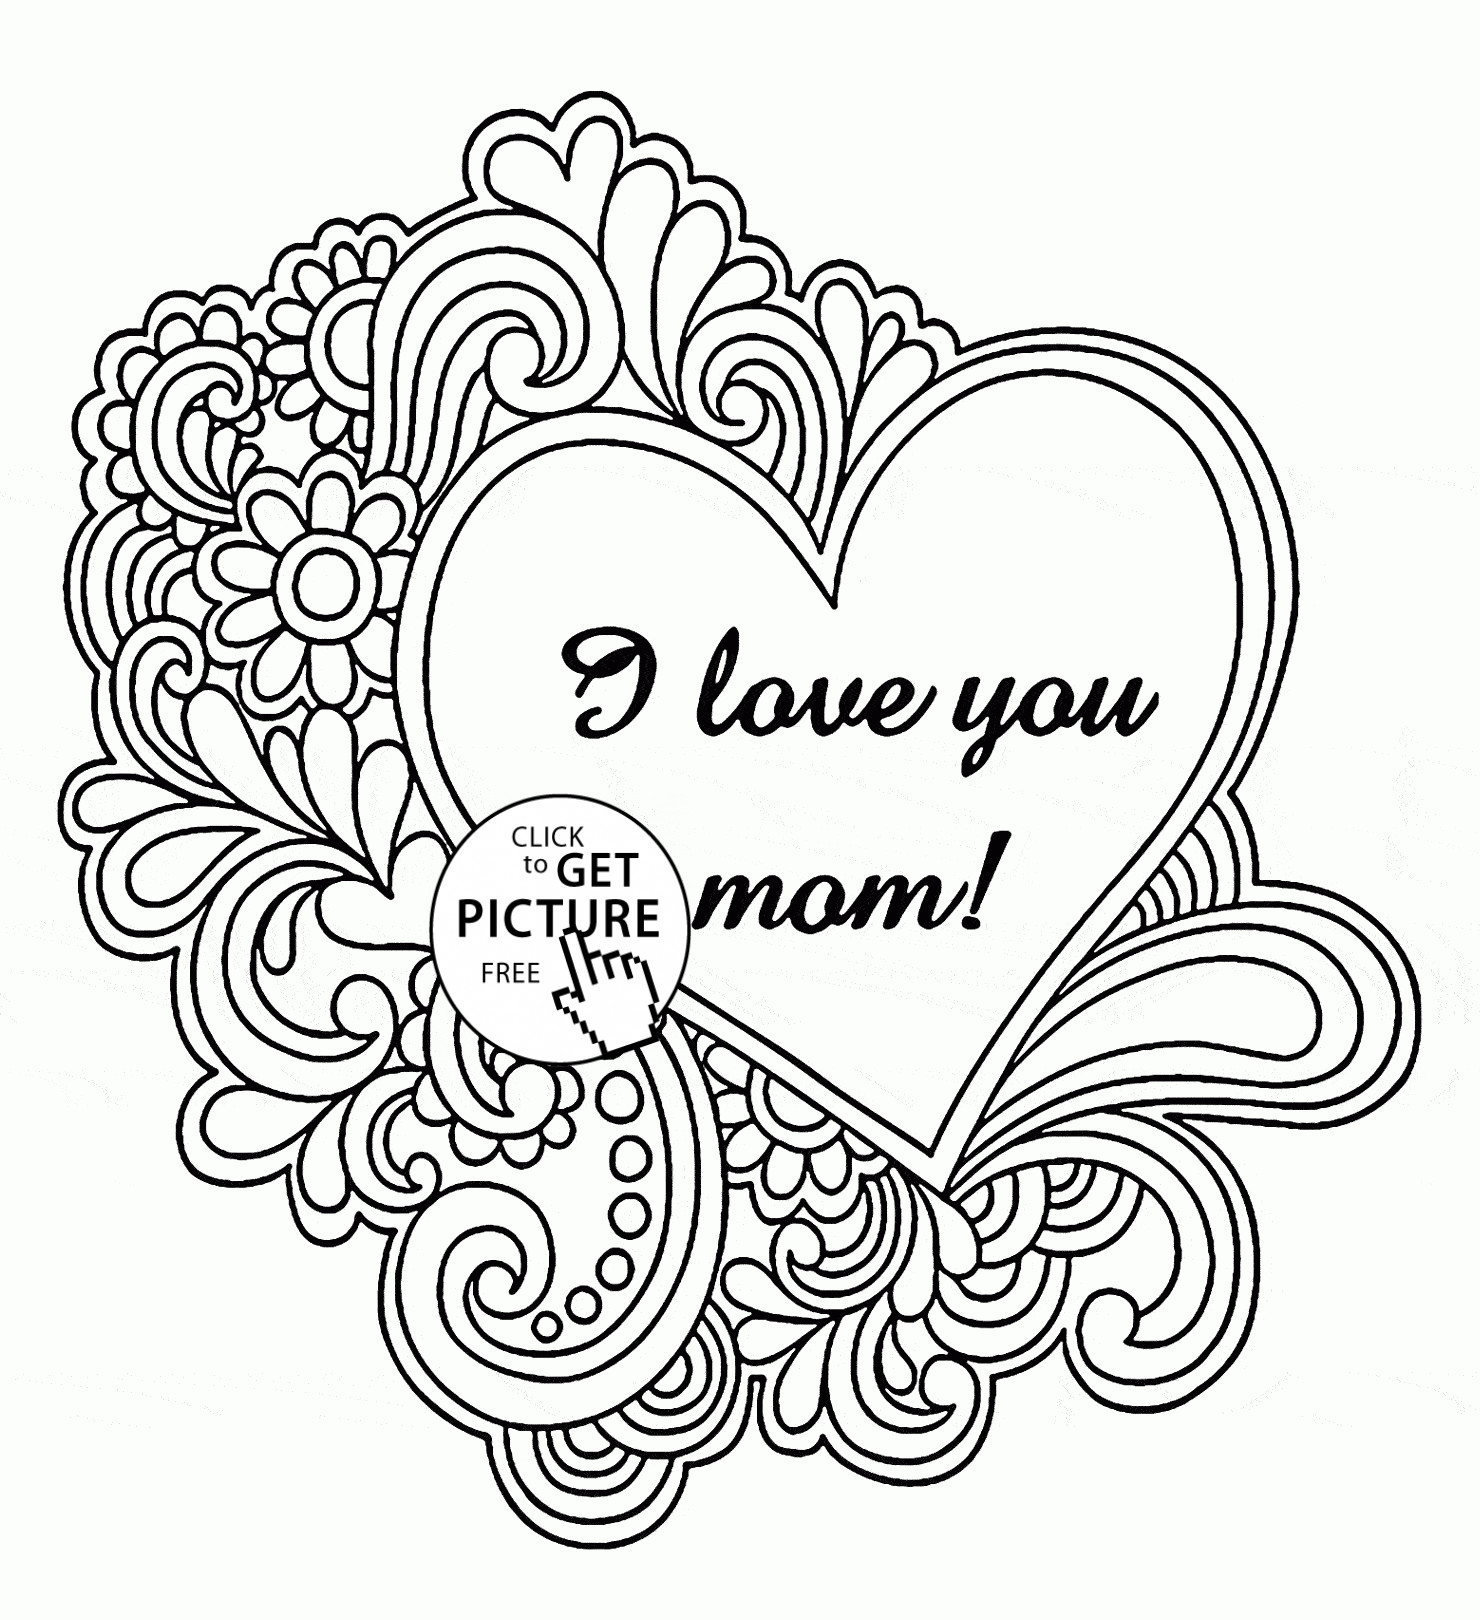 Mothers Day Coloring Pages For Adults
 I Love You Mother Mothers Day coloring page for kids